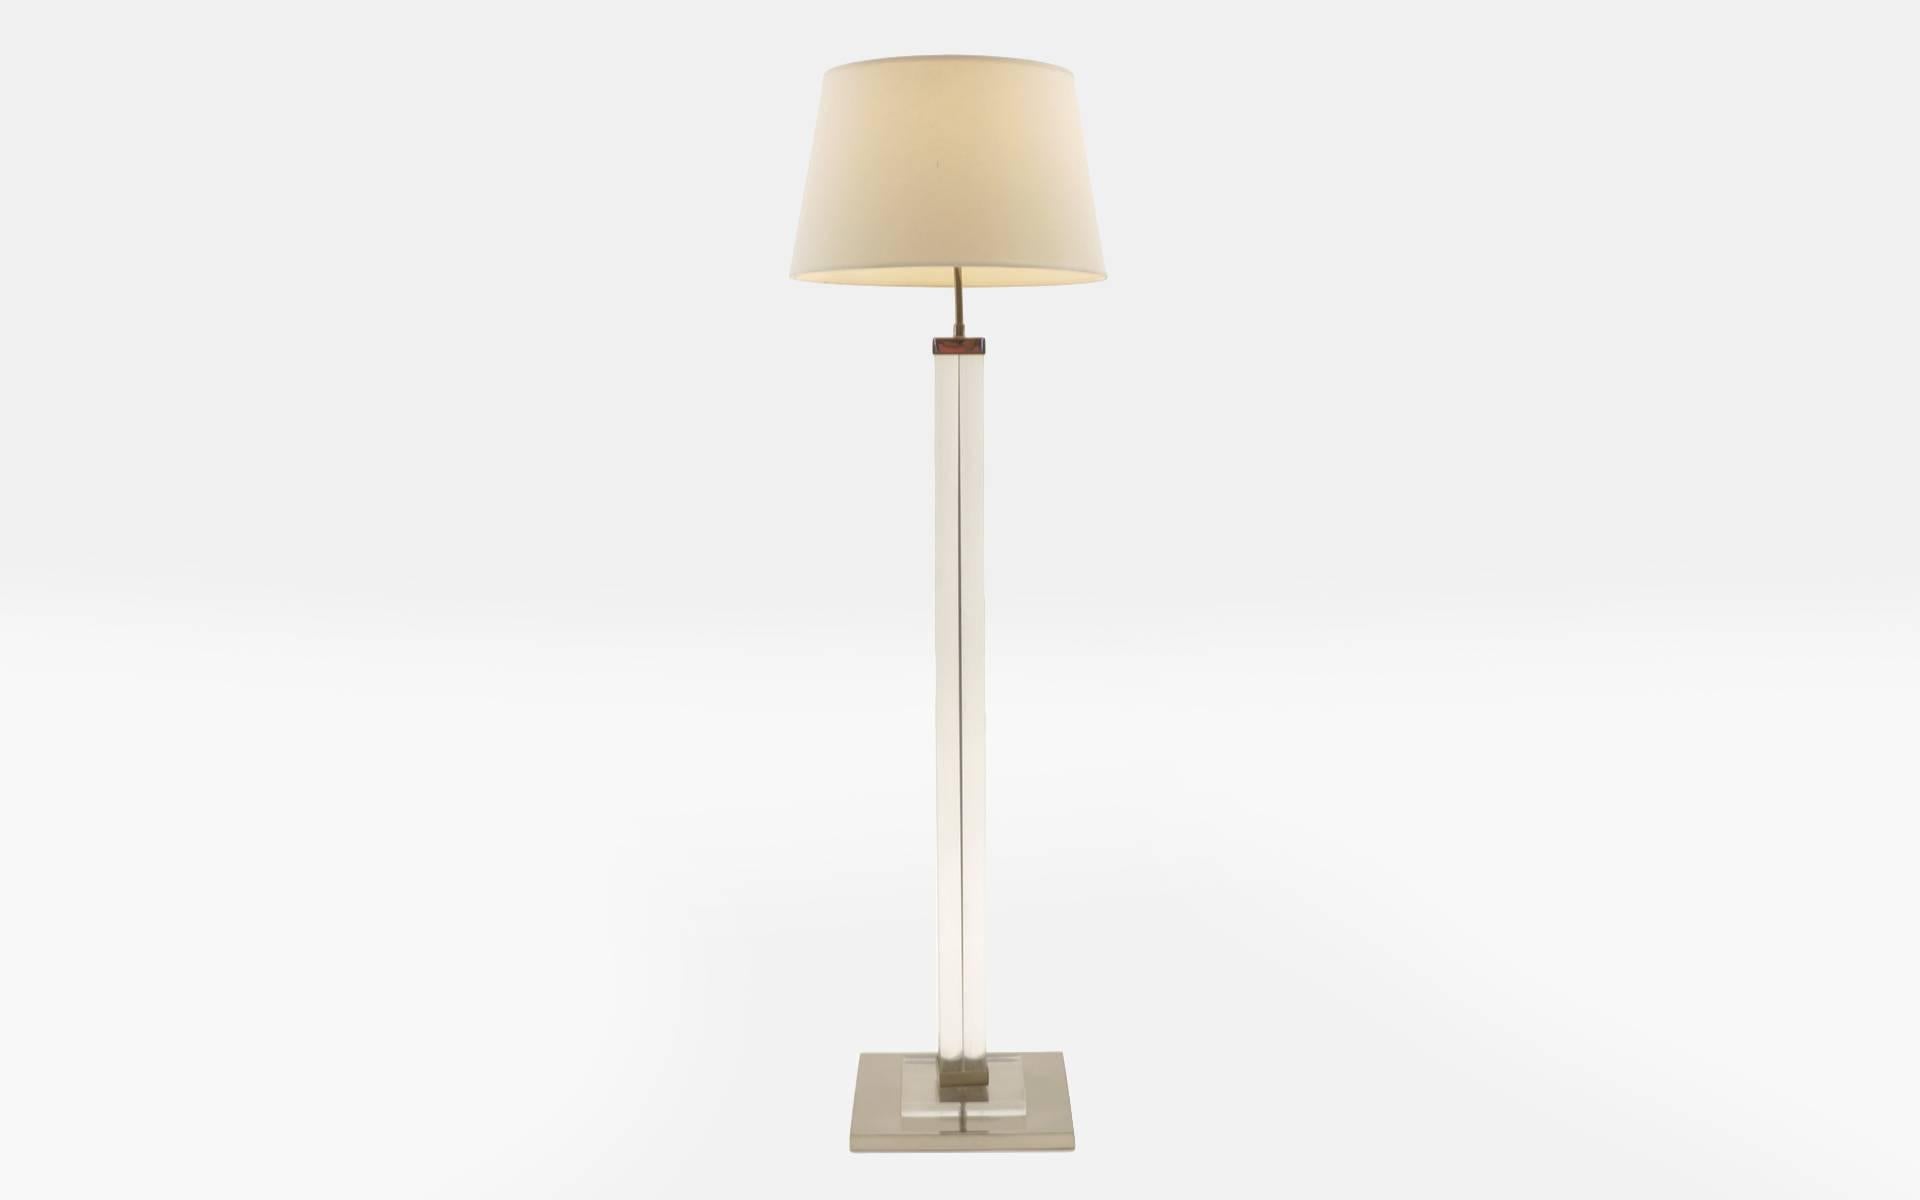 Original Charles Hollis Jones Lucite floor lamp.   Lamp base is 14 inches square.  Lamp shade at the widest is 19.5 inches